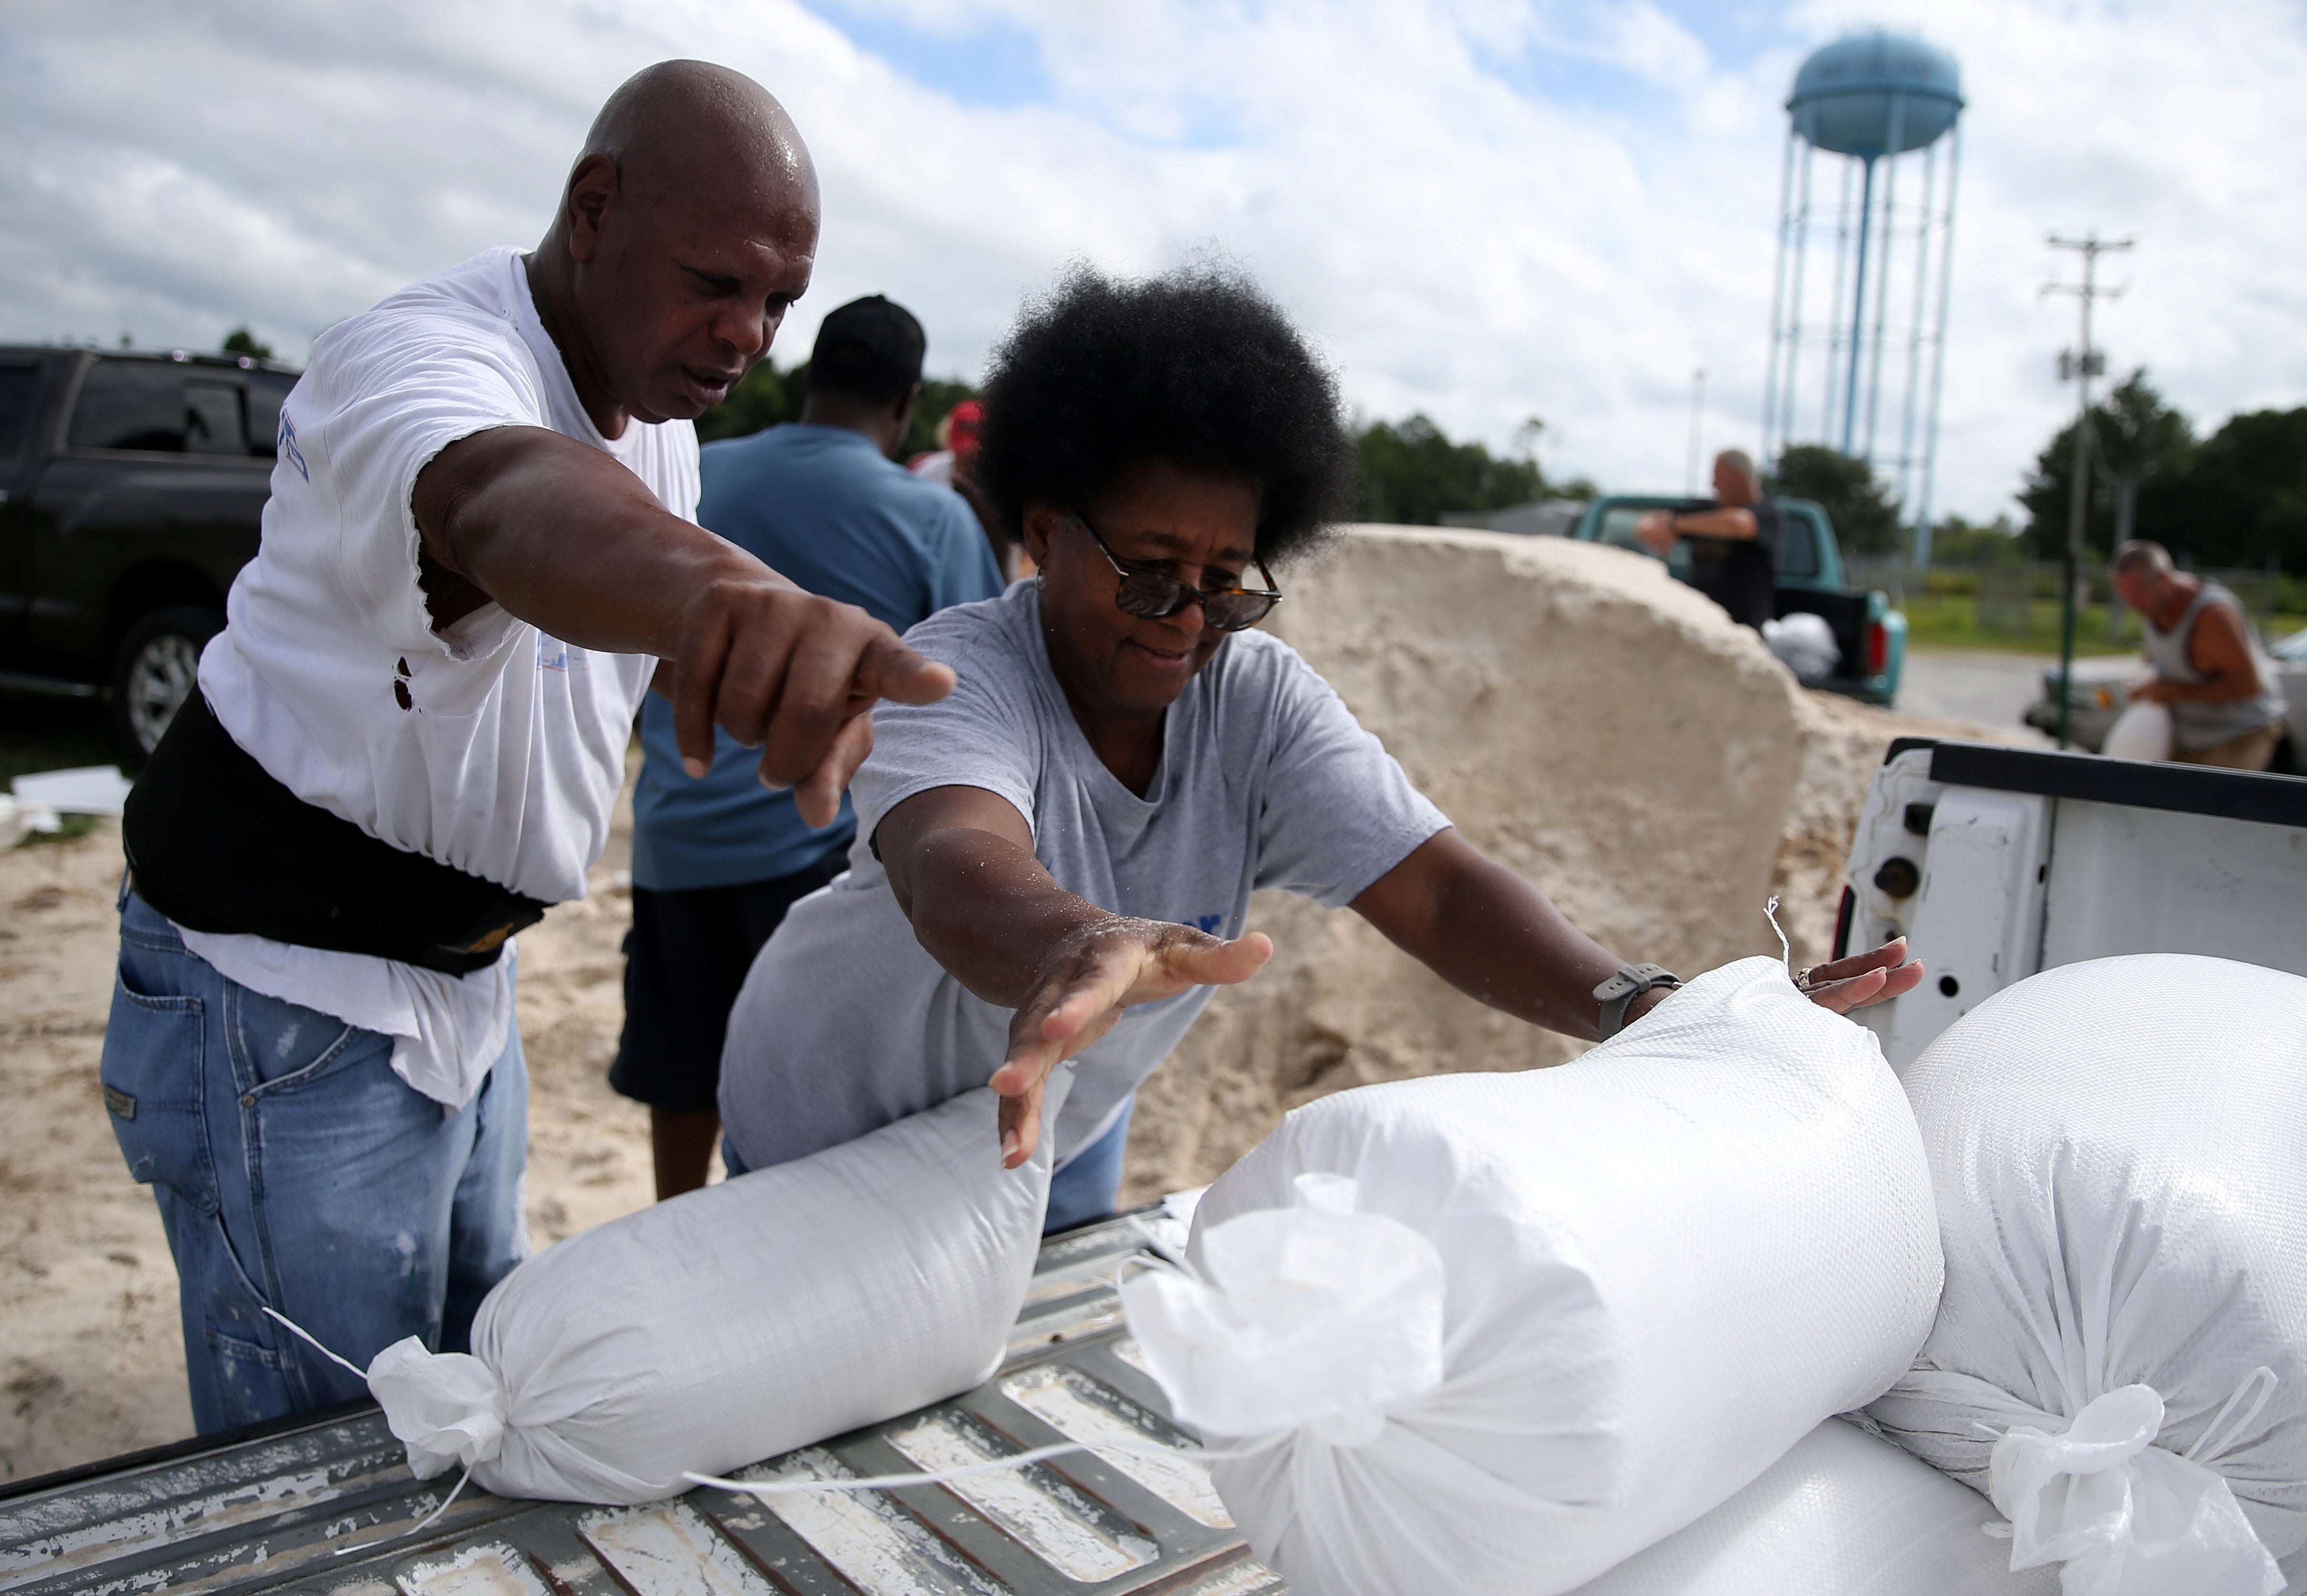 Mississippi residents Sam Dorsey and Dianne Fredrick load sandbags in preparations for storm Sally